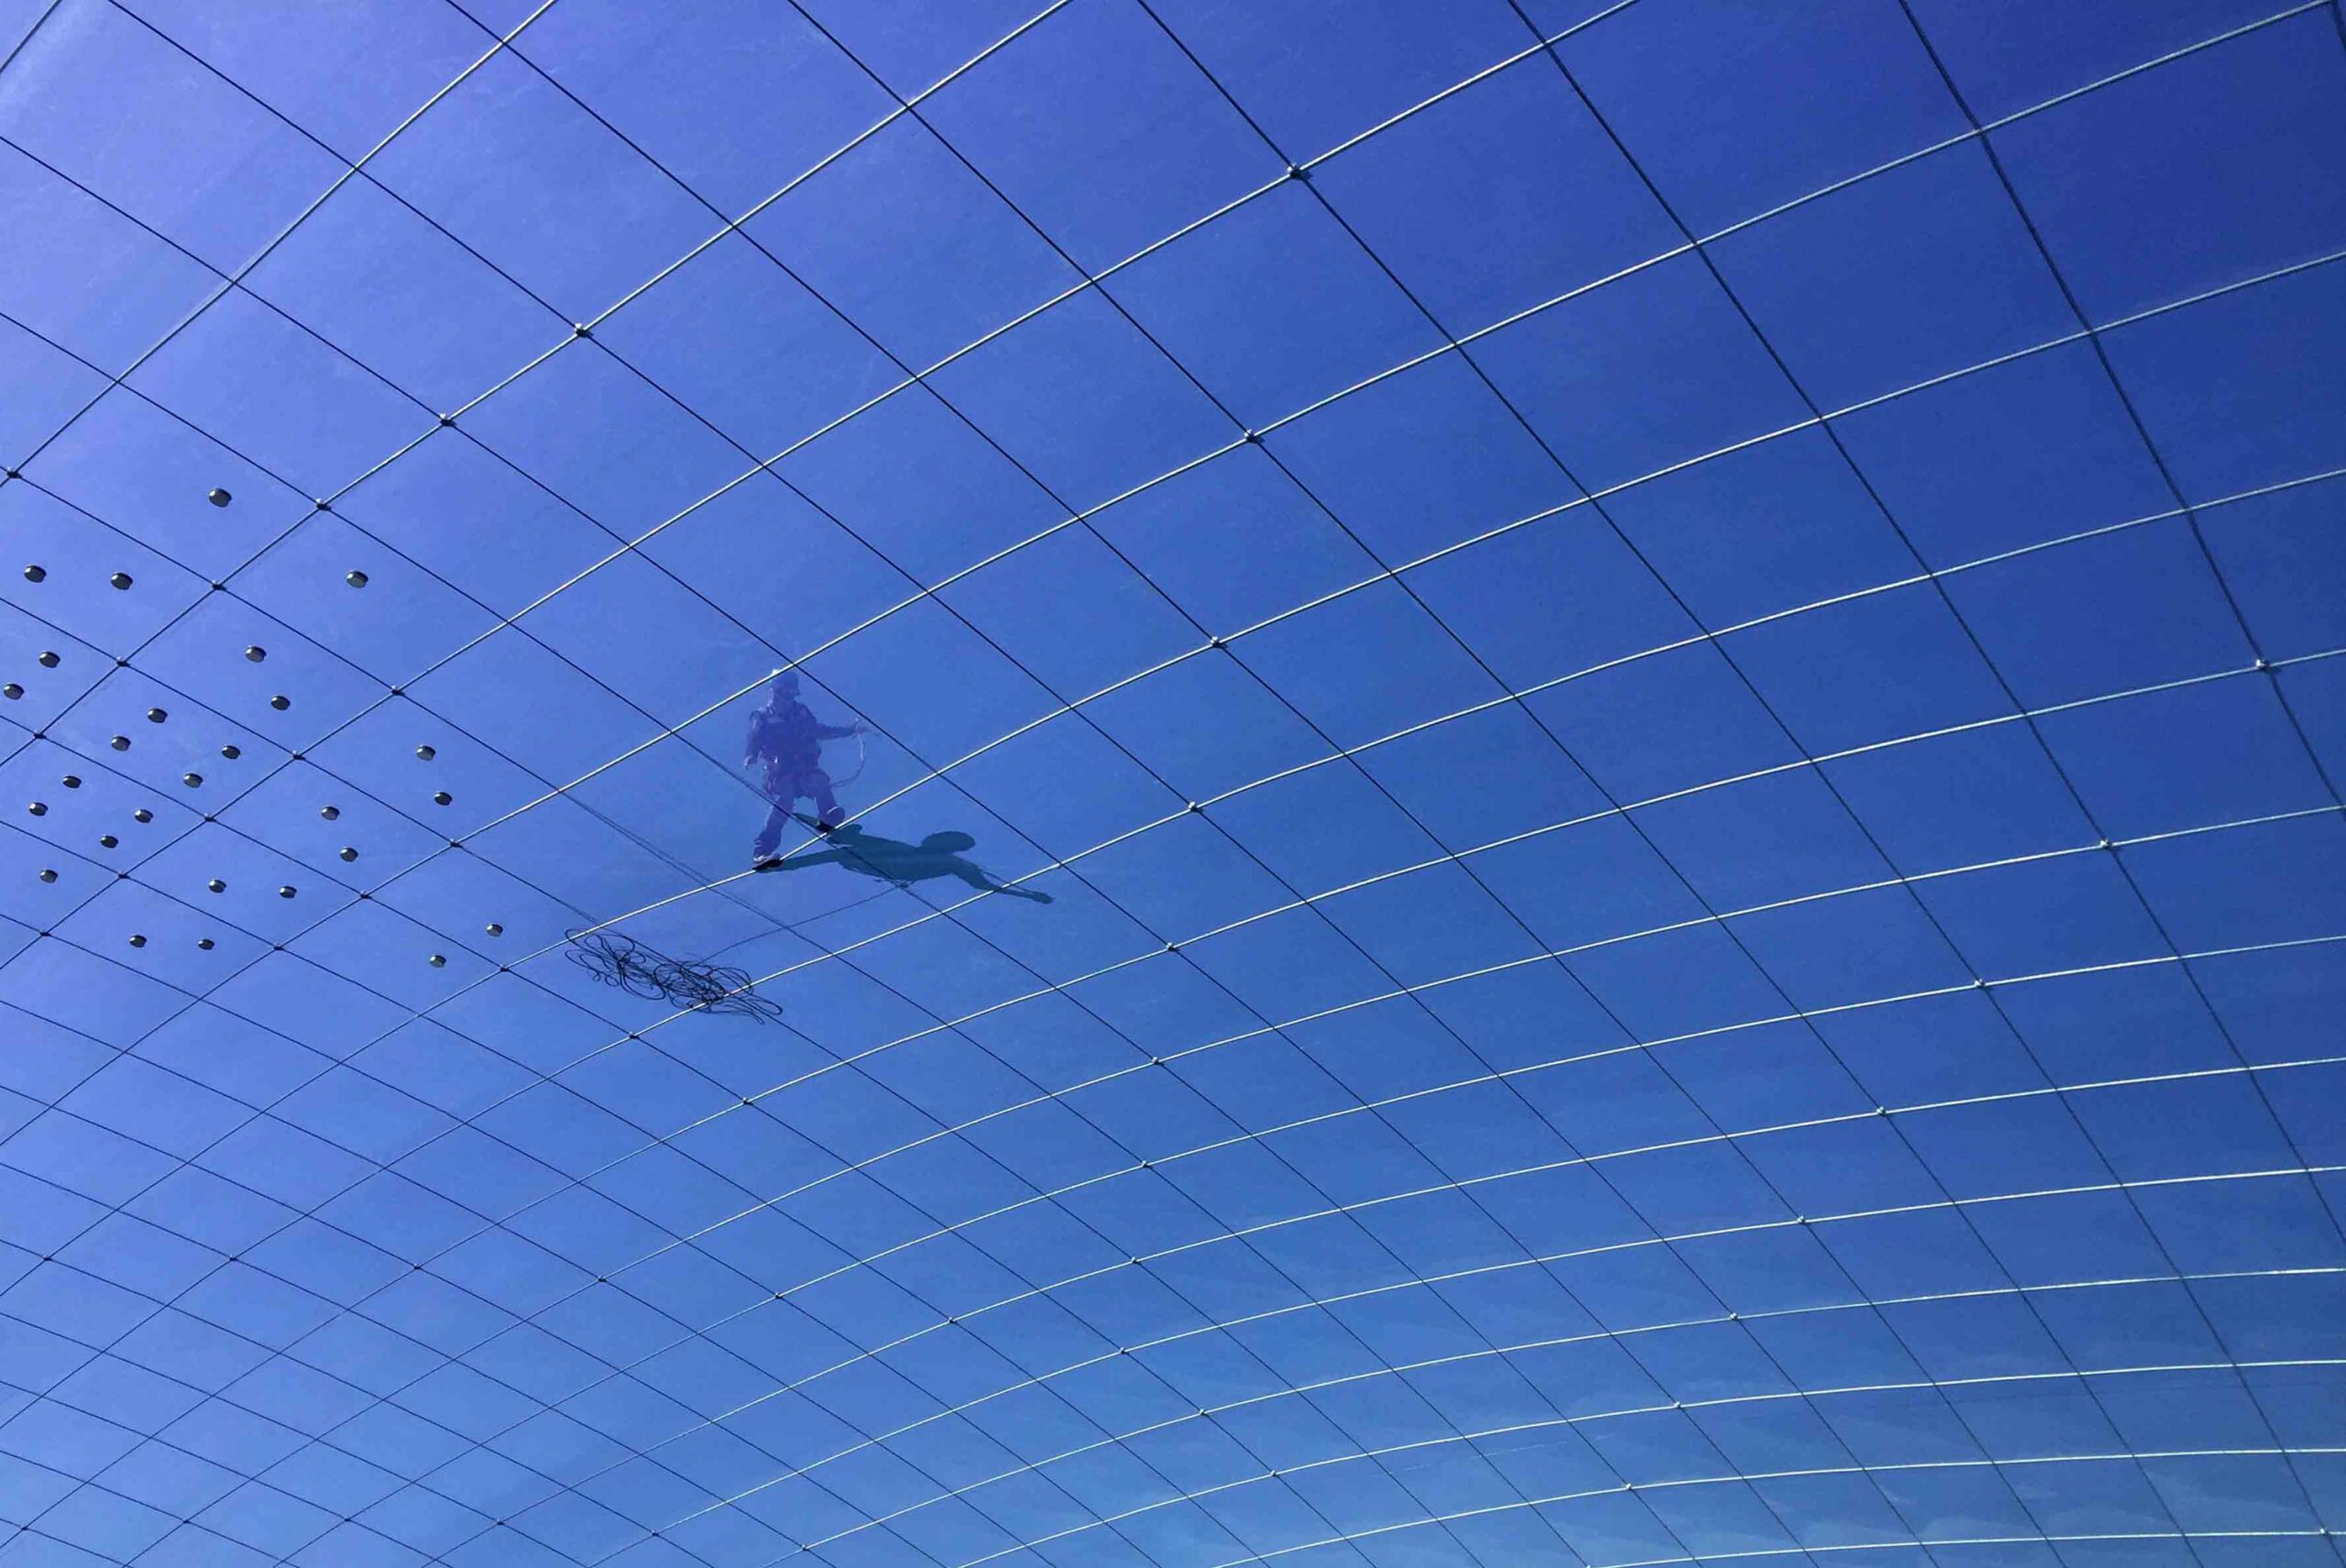 construction-worker-on-etfe-cushion-roof-with-steel-cable-support-blue-sky